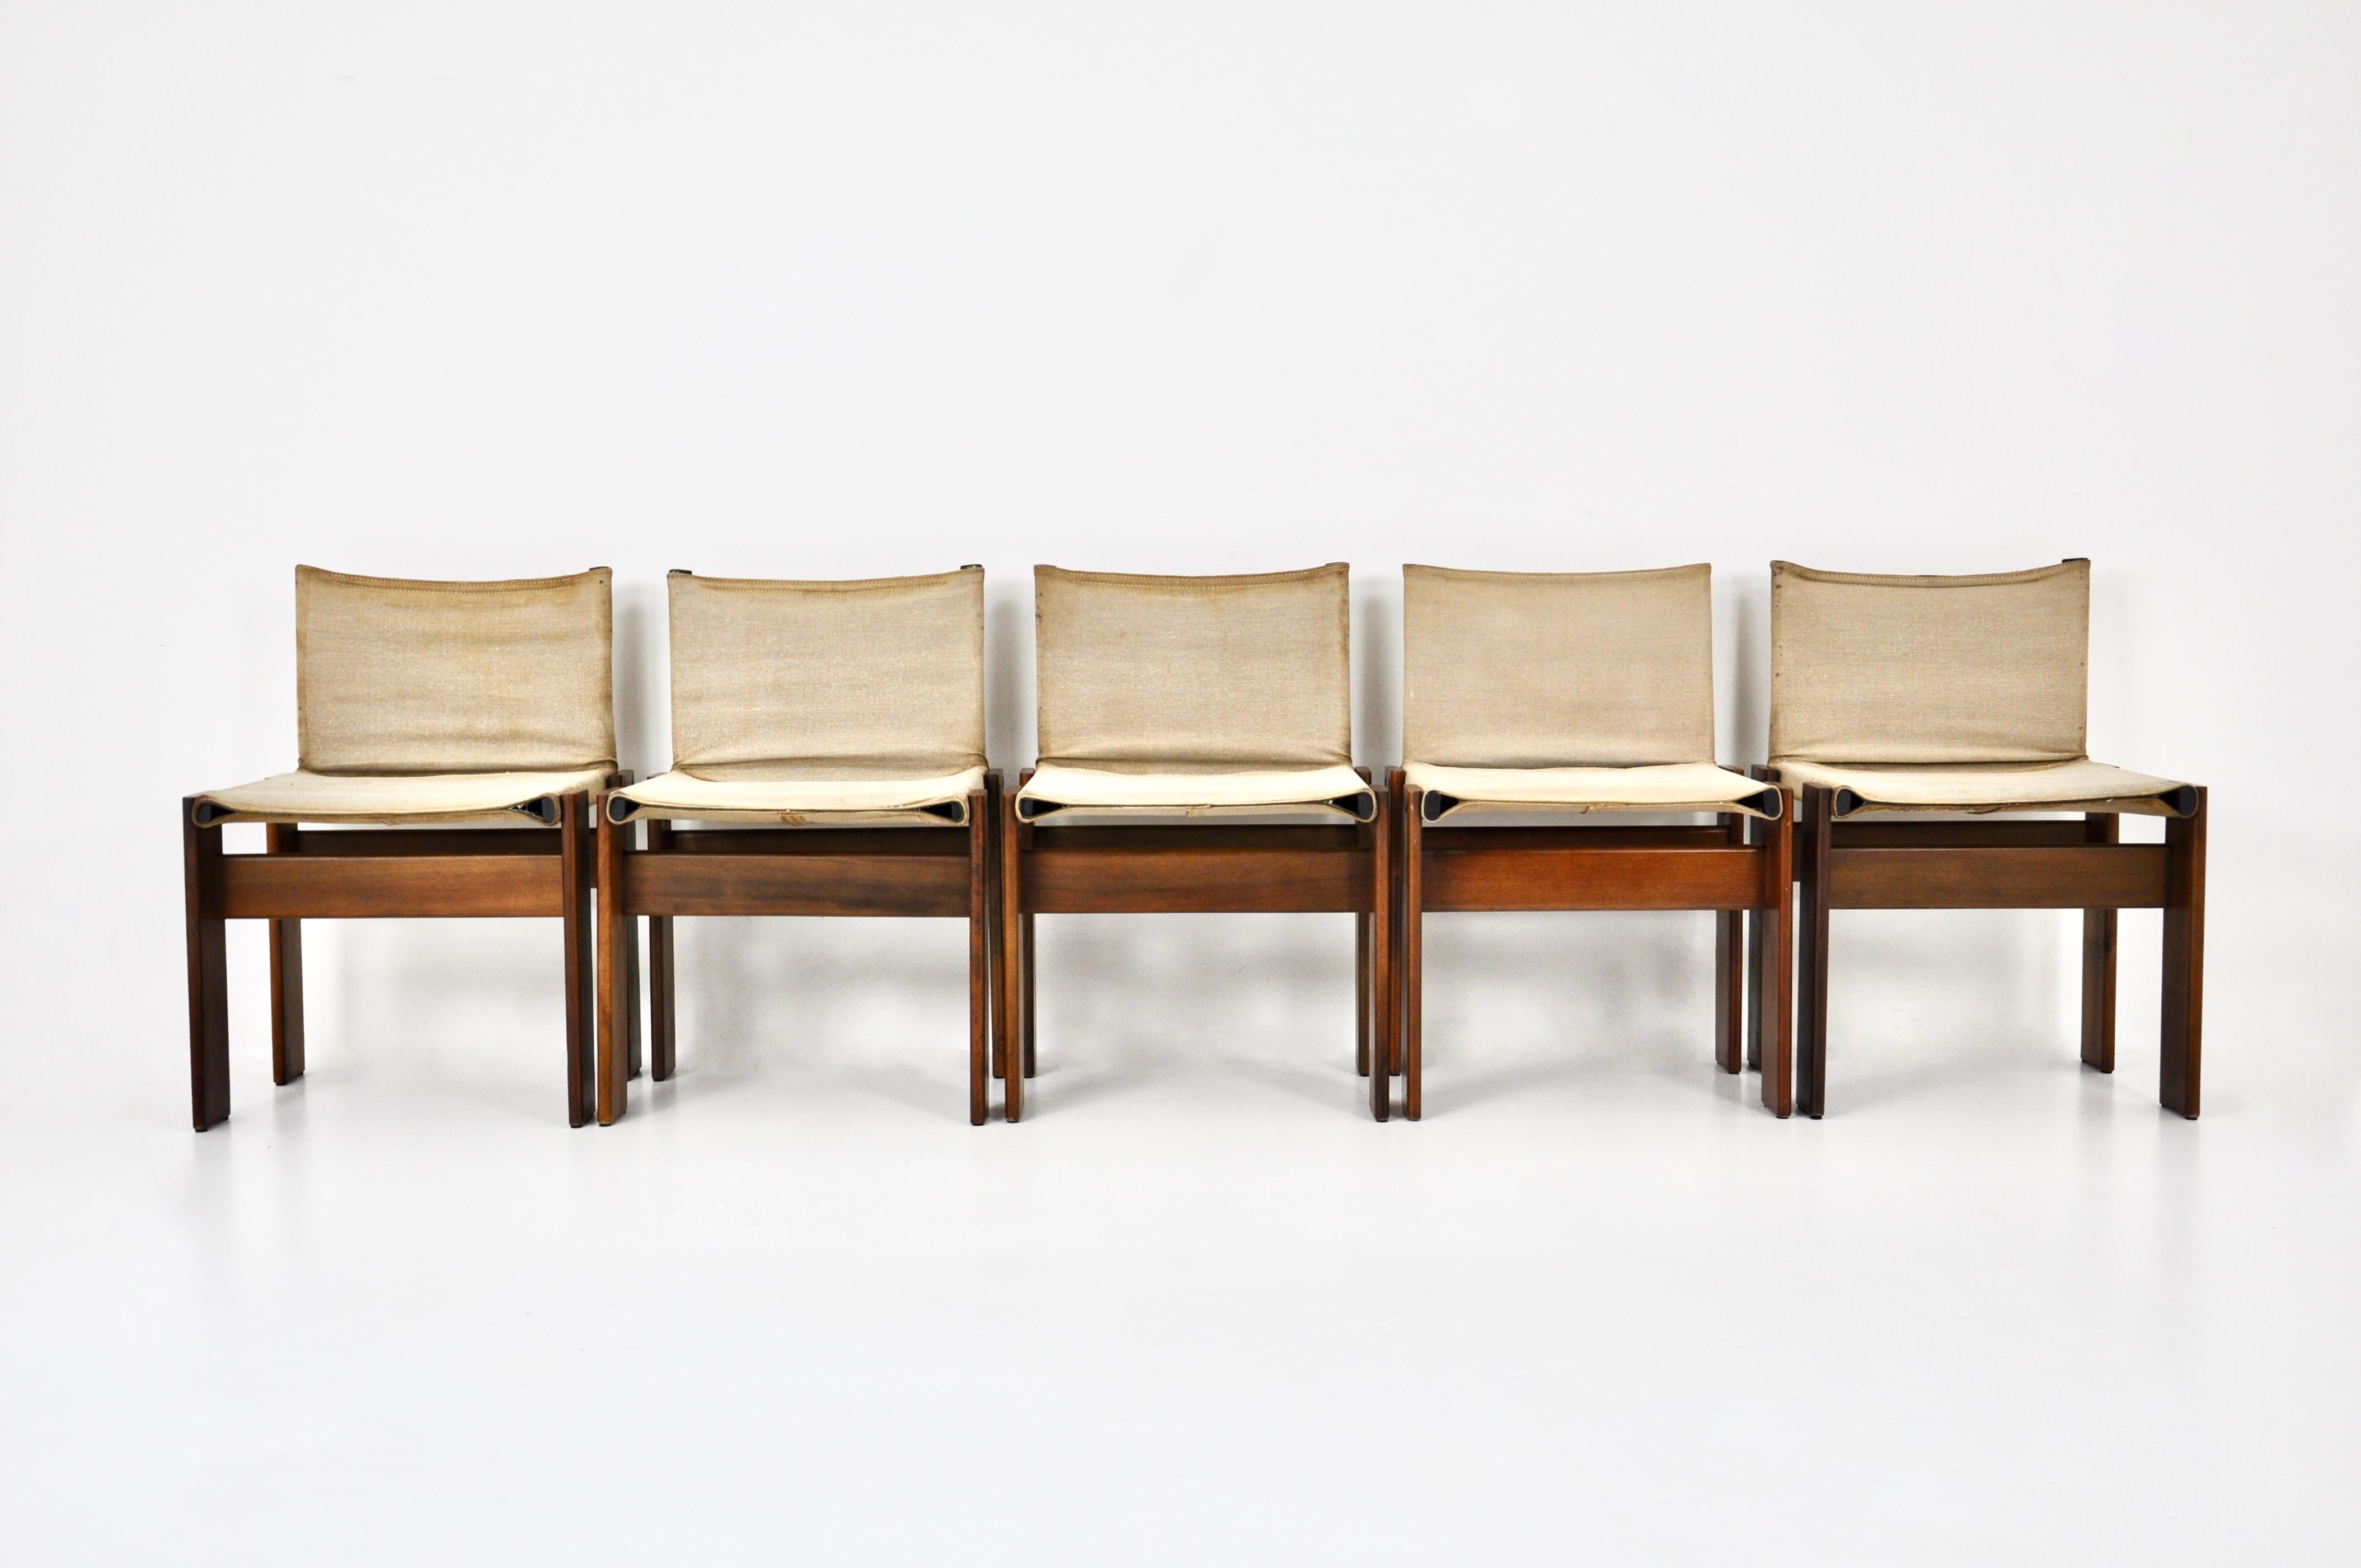 Set of 5 canvas and wood chairs by Afra and Tobia Scarpa. Model: Monk. Seat height: 44 cm. Wear due to time and age of the chairs.